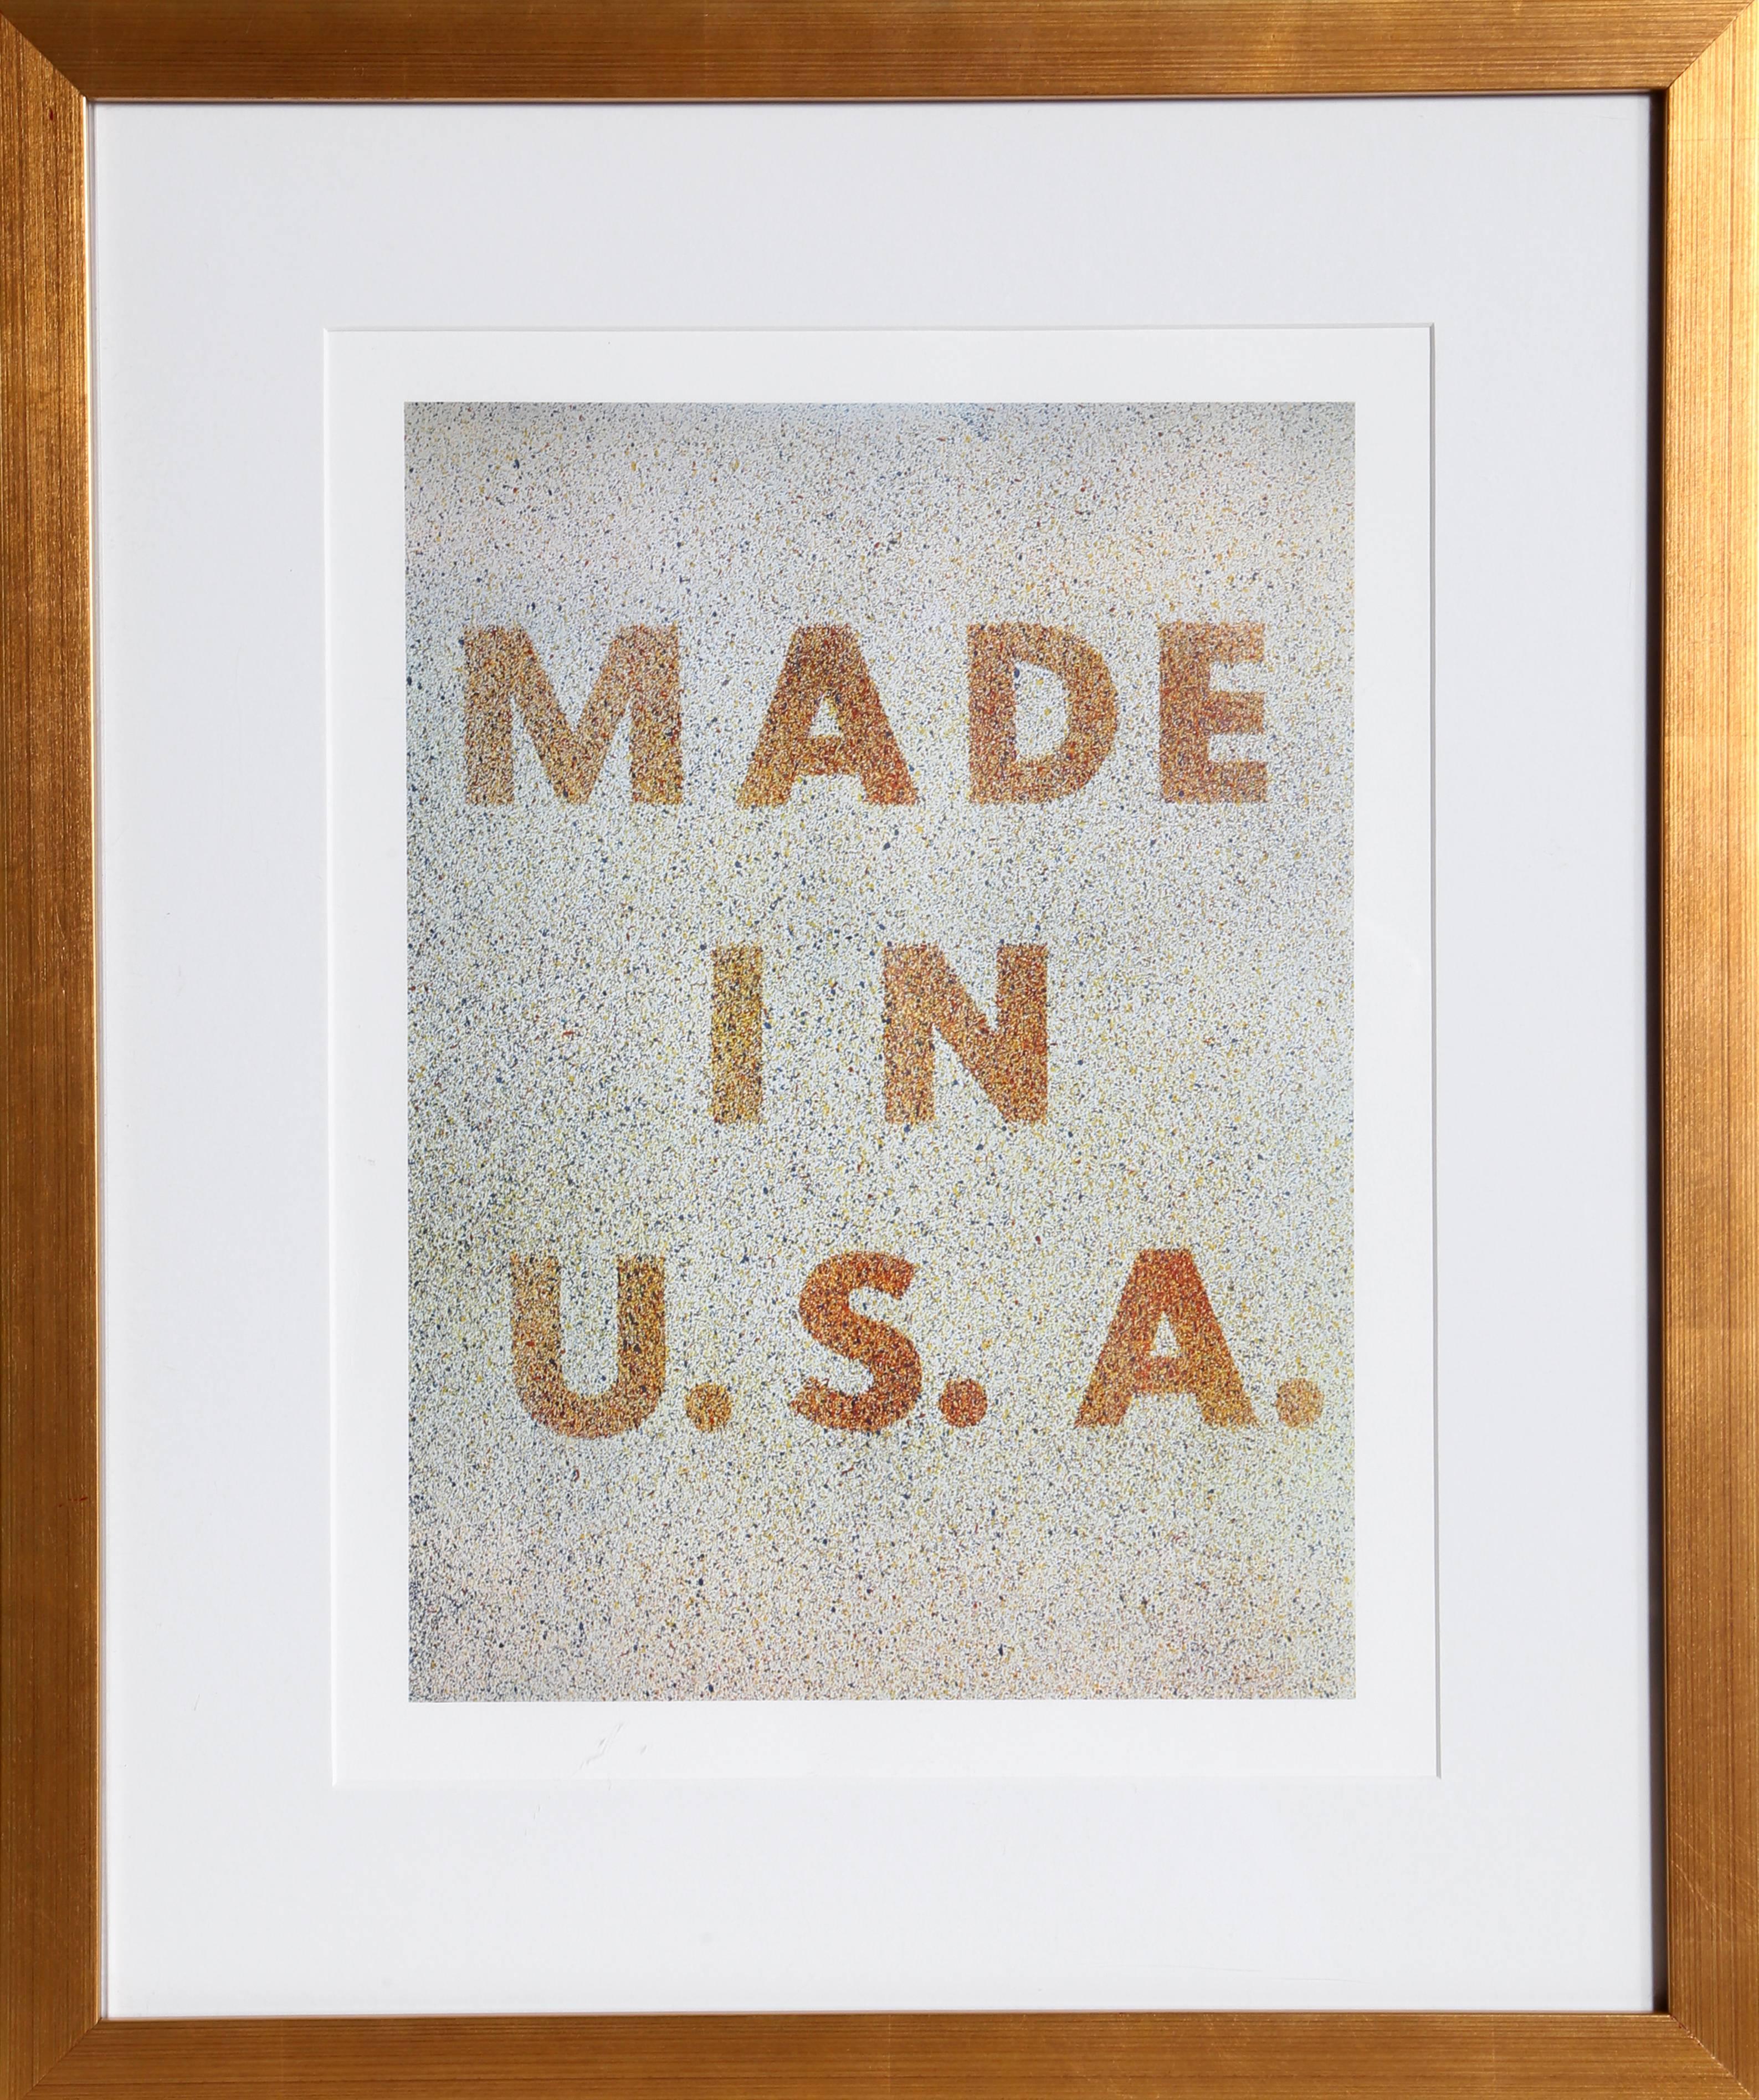 Ed Ruscha Abstract Print - America: Her Best Product (Made in USA)